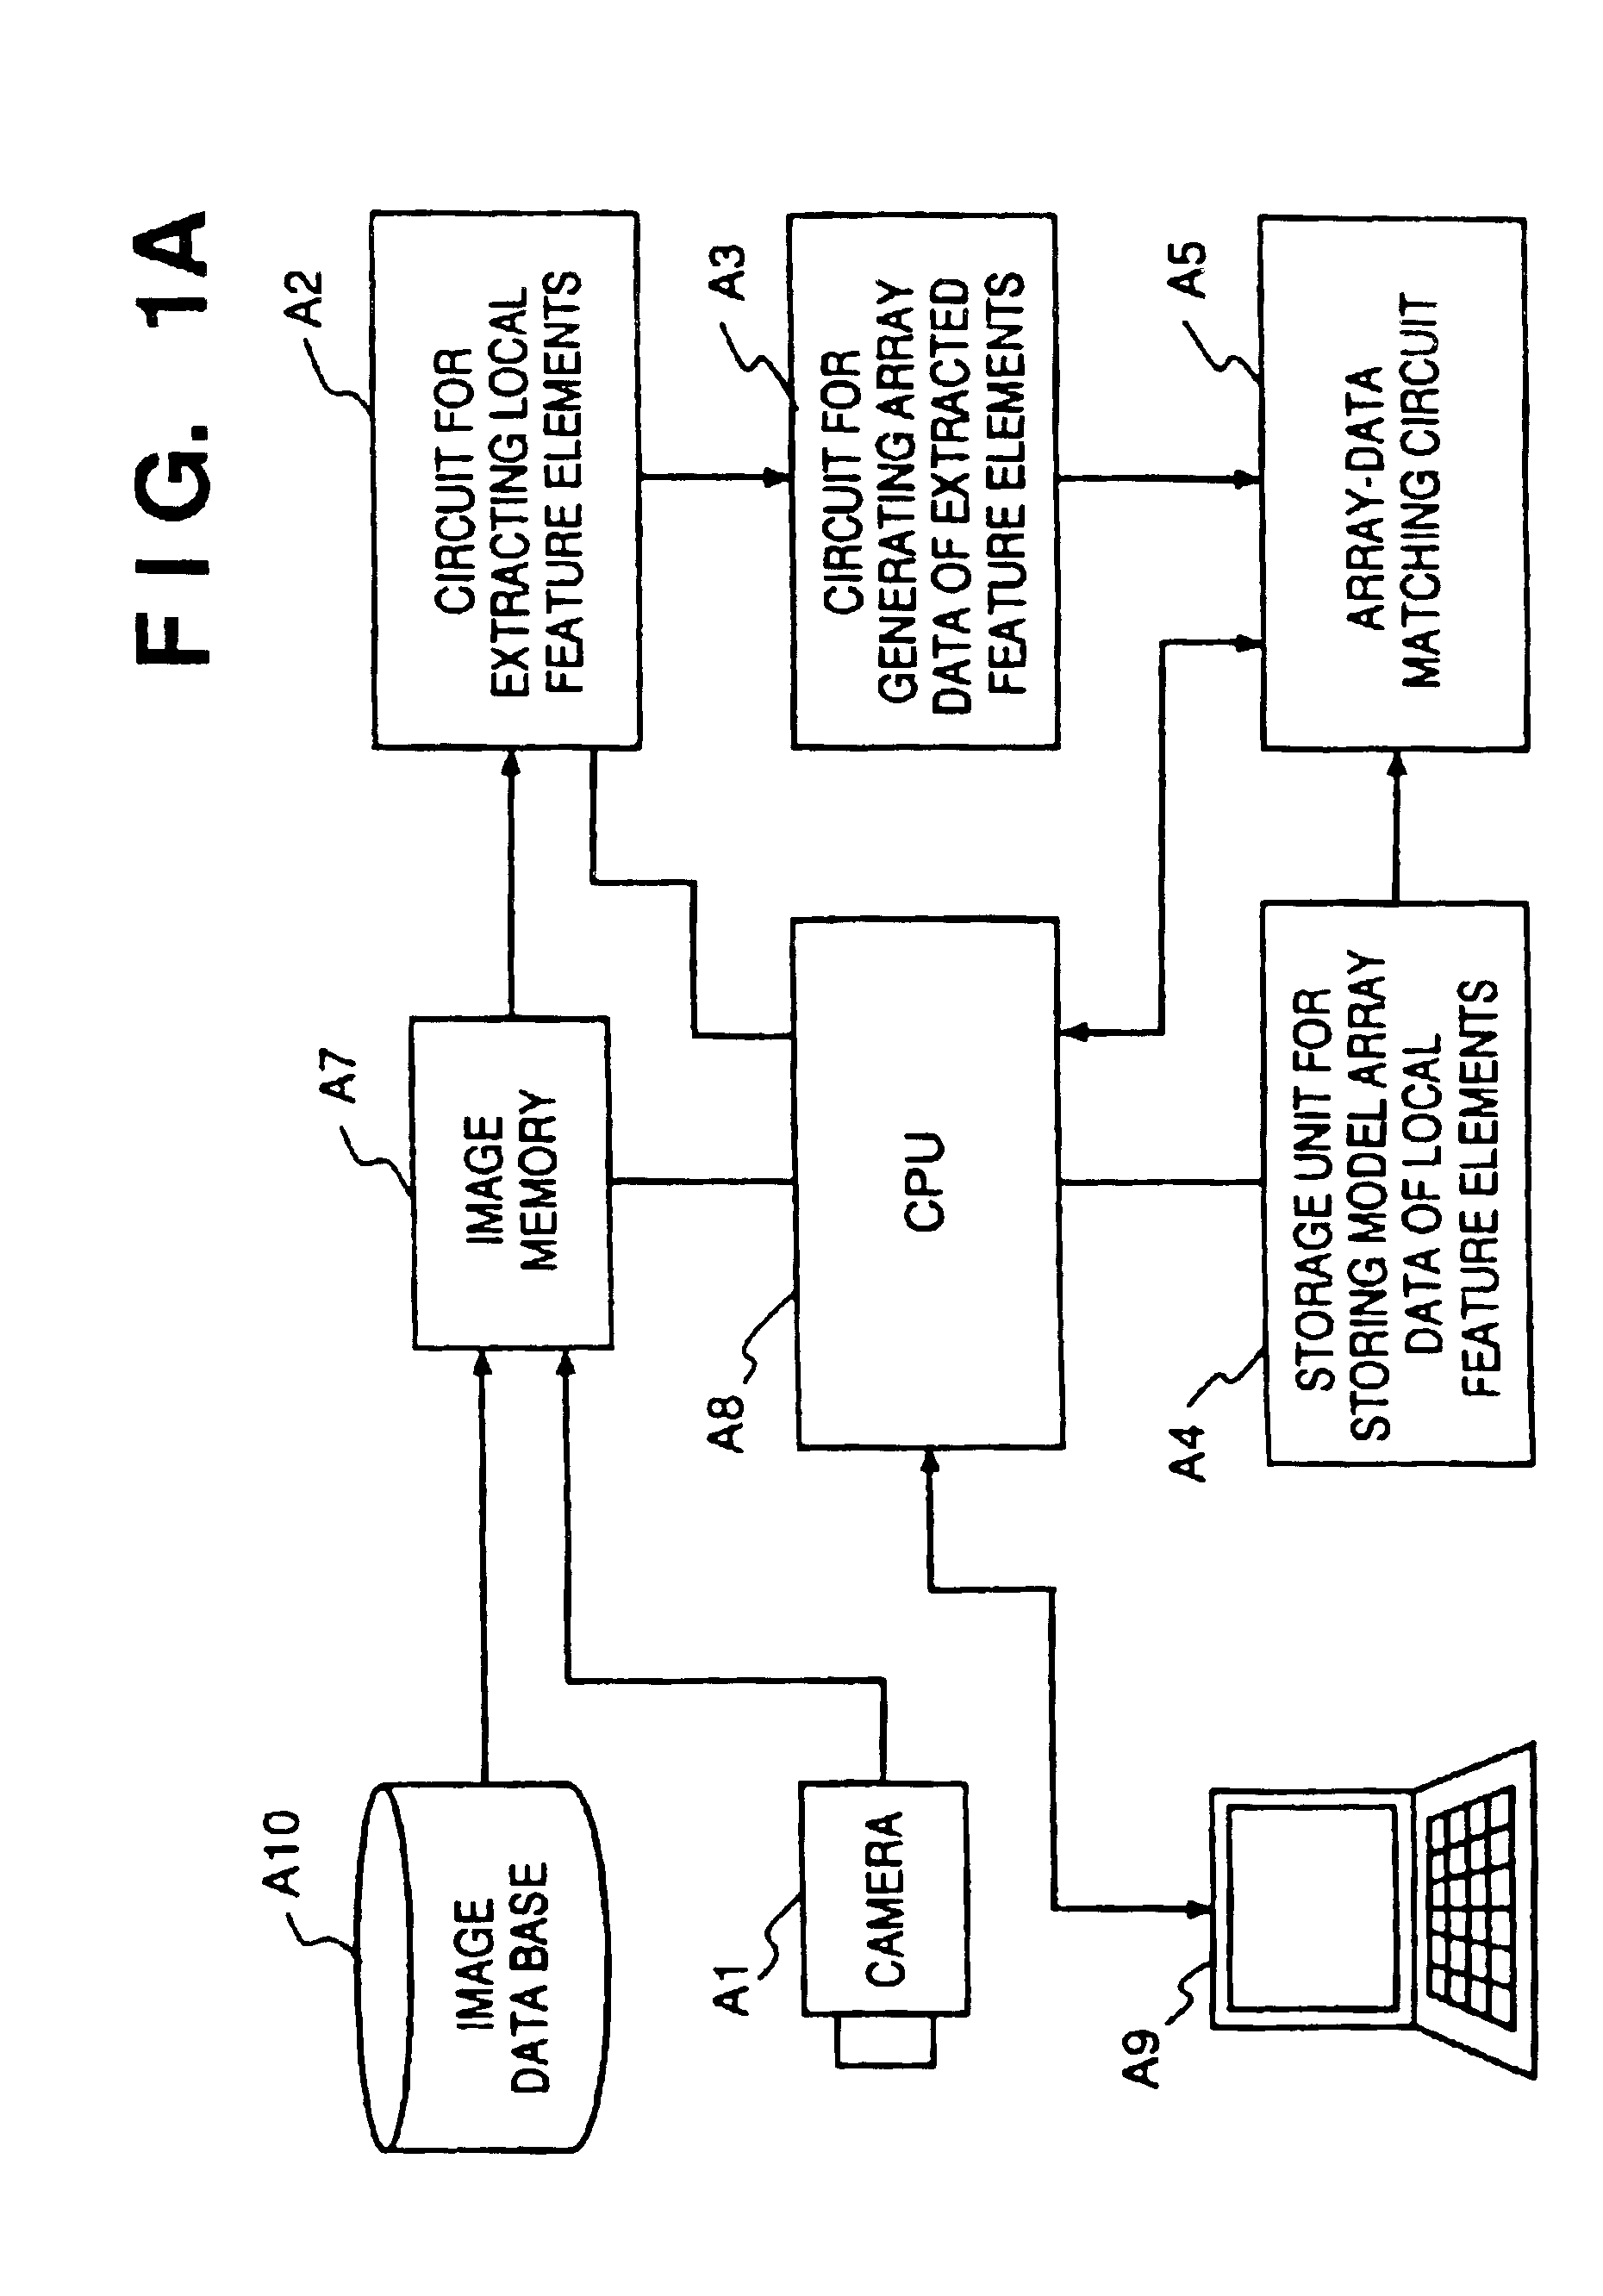 Image recognition/reproduction method and apparatus